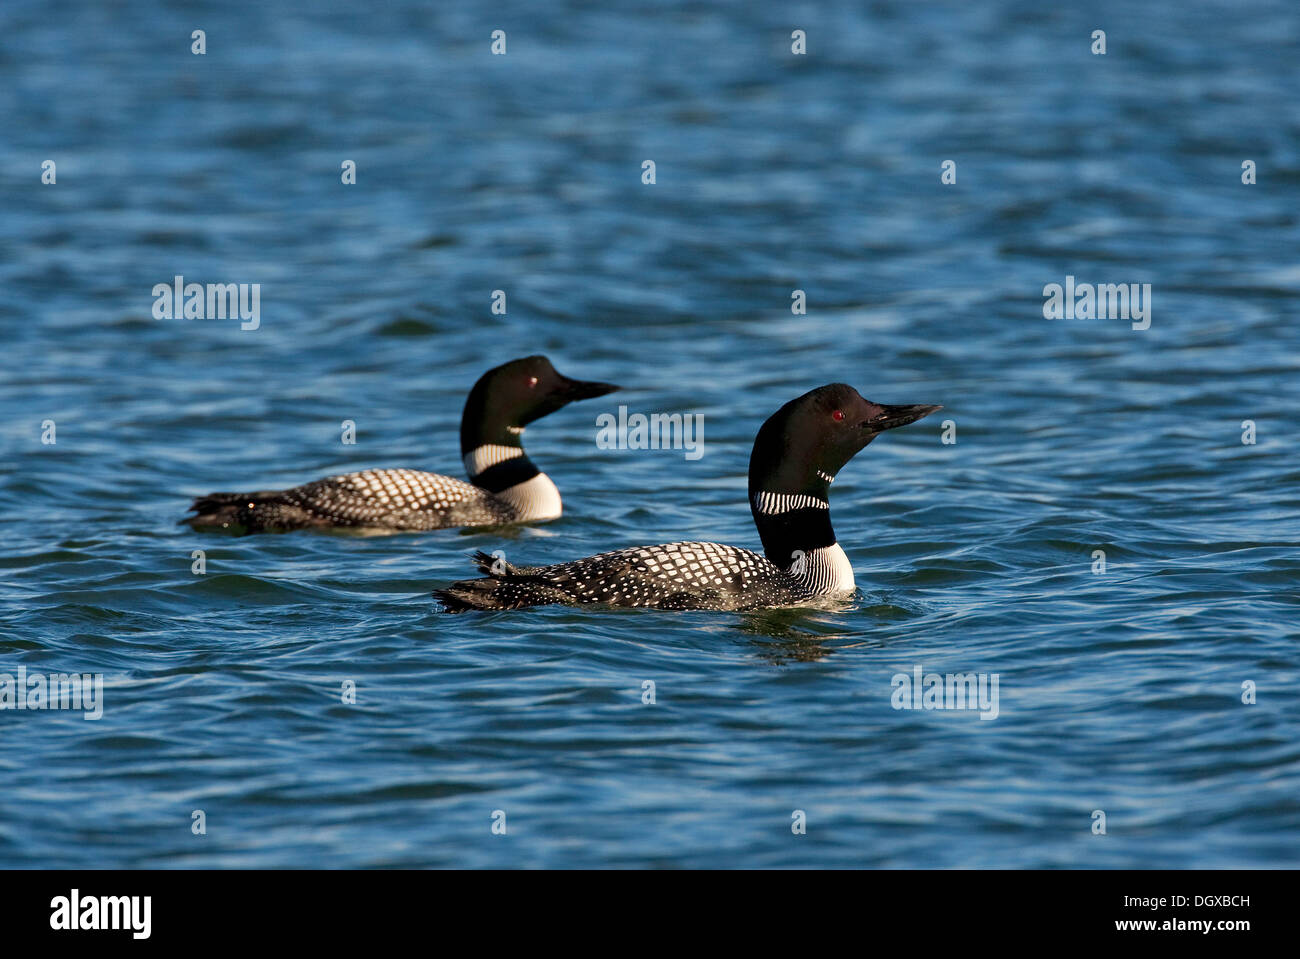 Great Northern Loon or Great Northern Diver (Gavia immer), Myvatn, Iceland, Europe Stock Photo